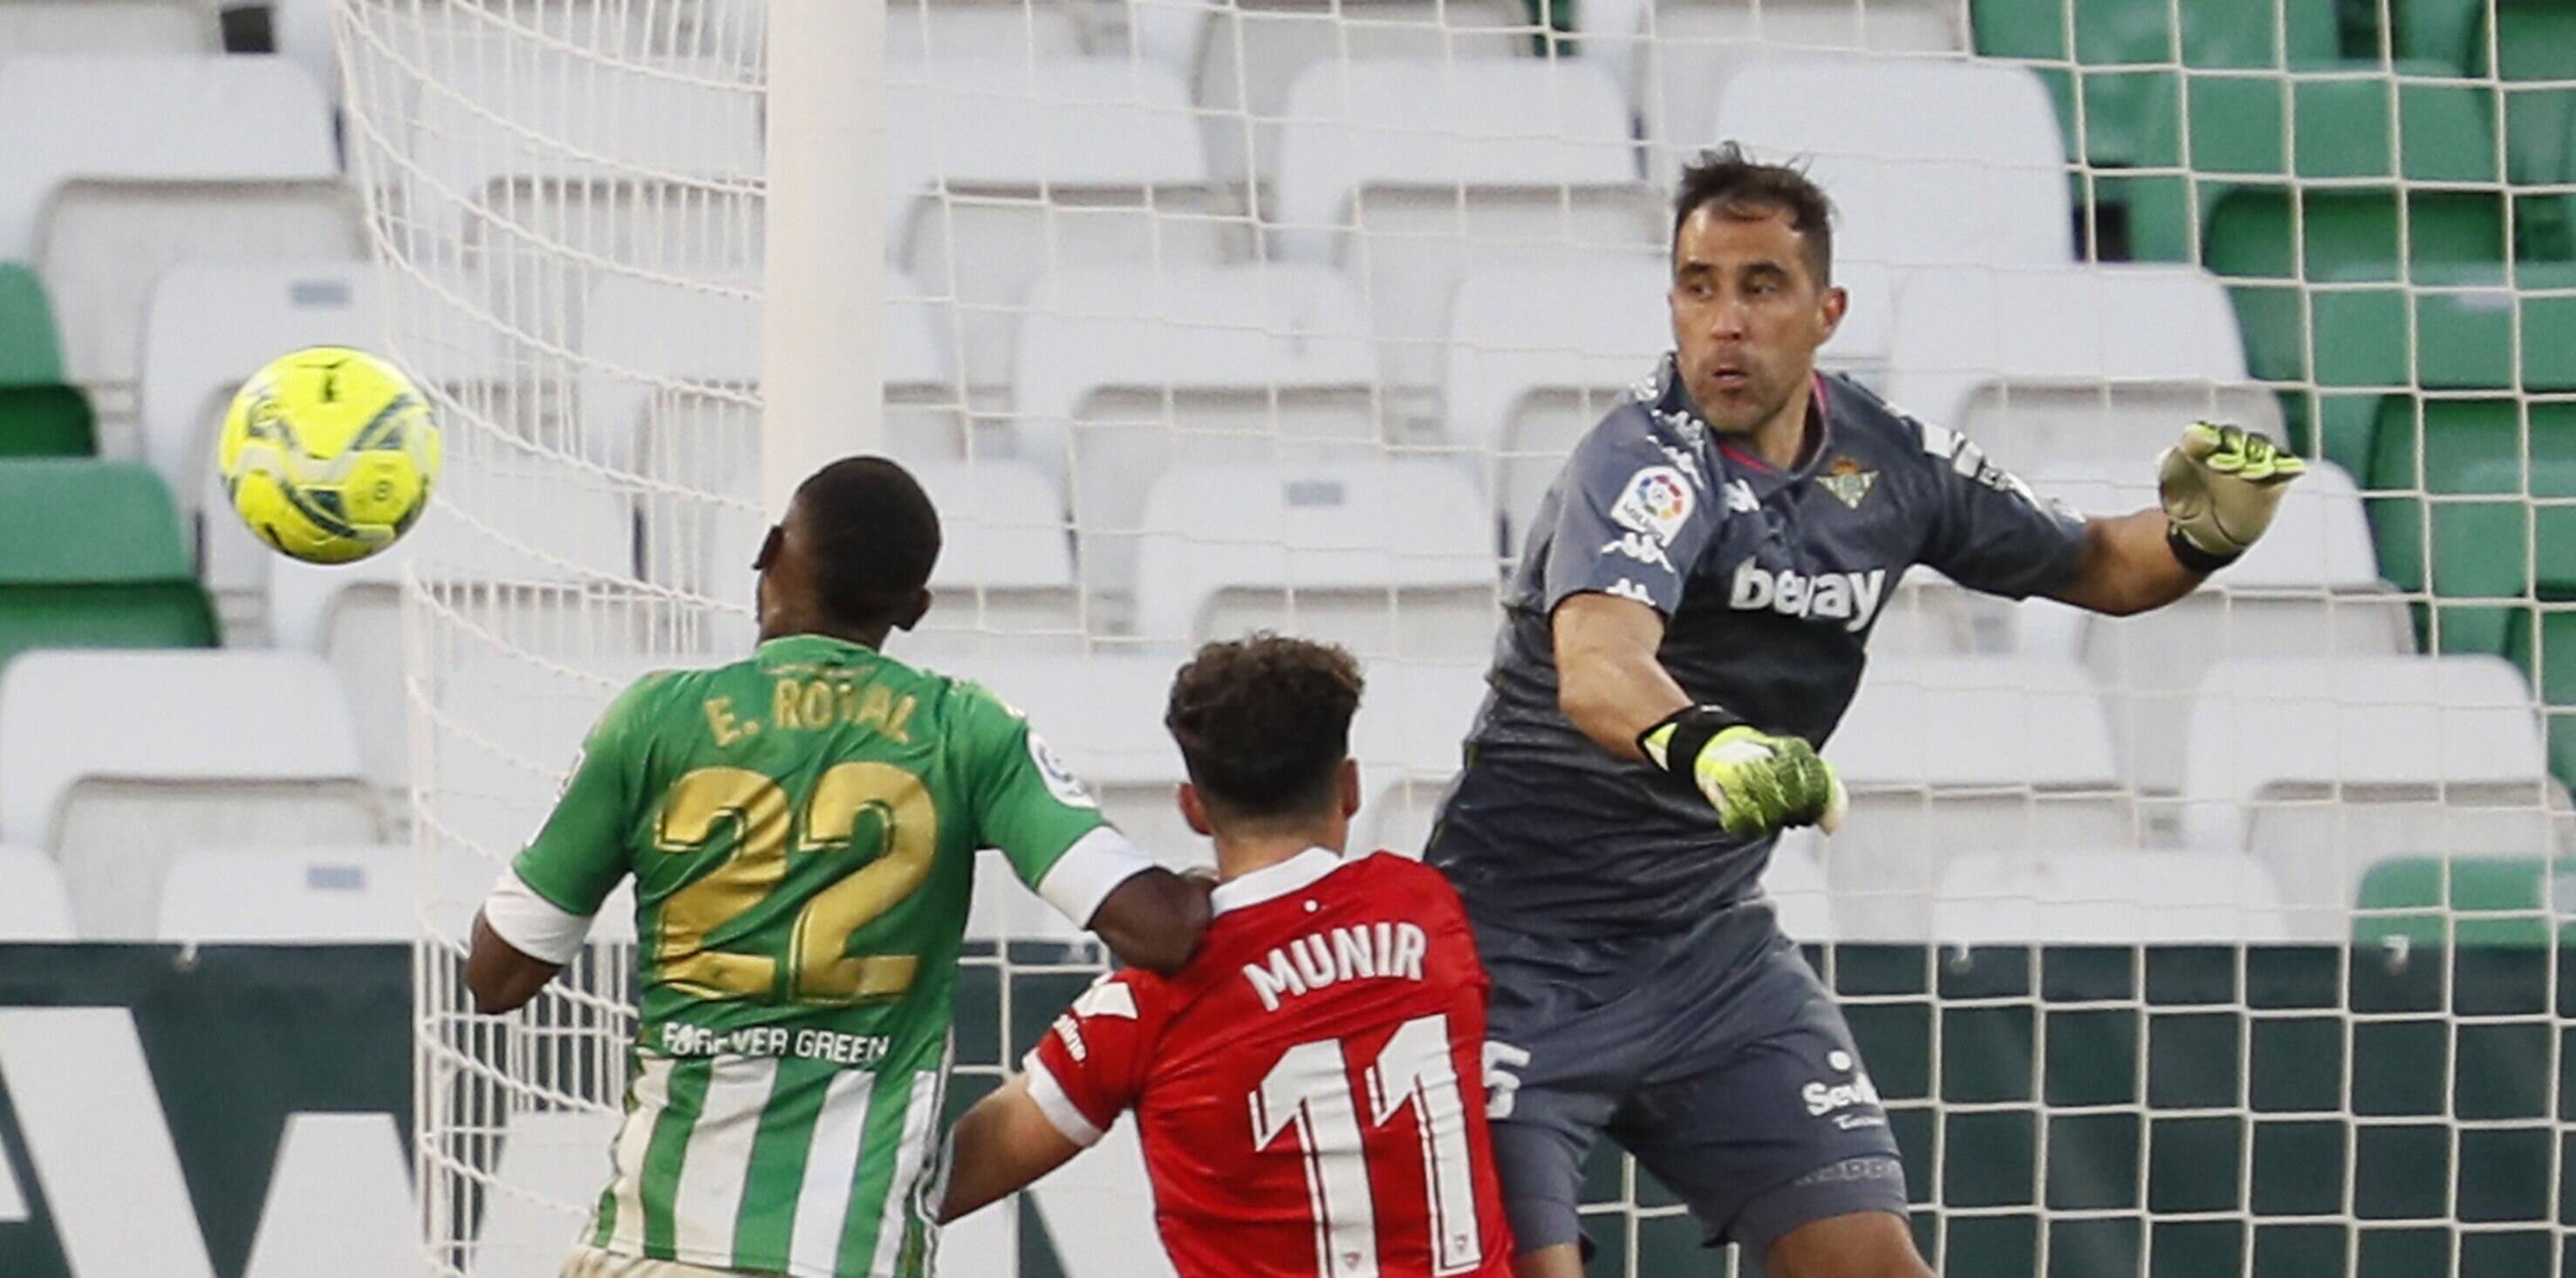 Betis Goalkeeper Claudio Bravo (r) In Action During The Spanish Laliga Soccer Match Between Real Betis And Sevilla Fc A